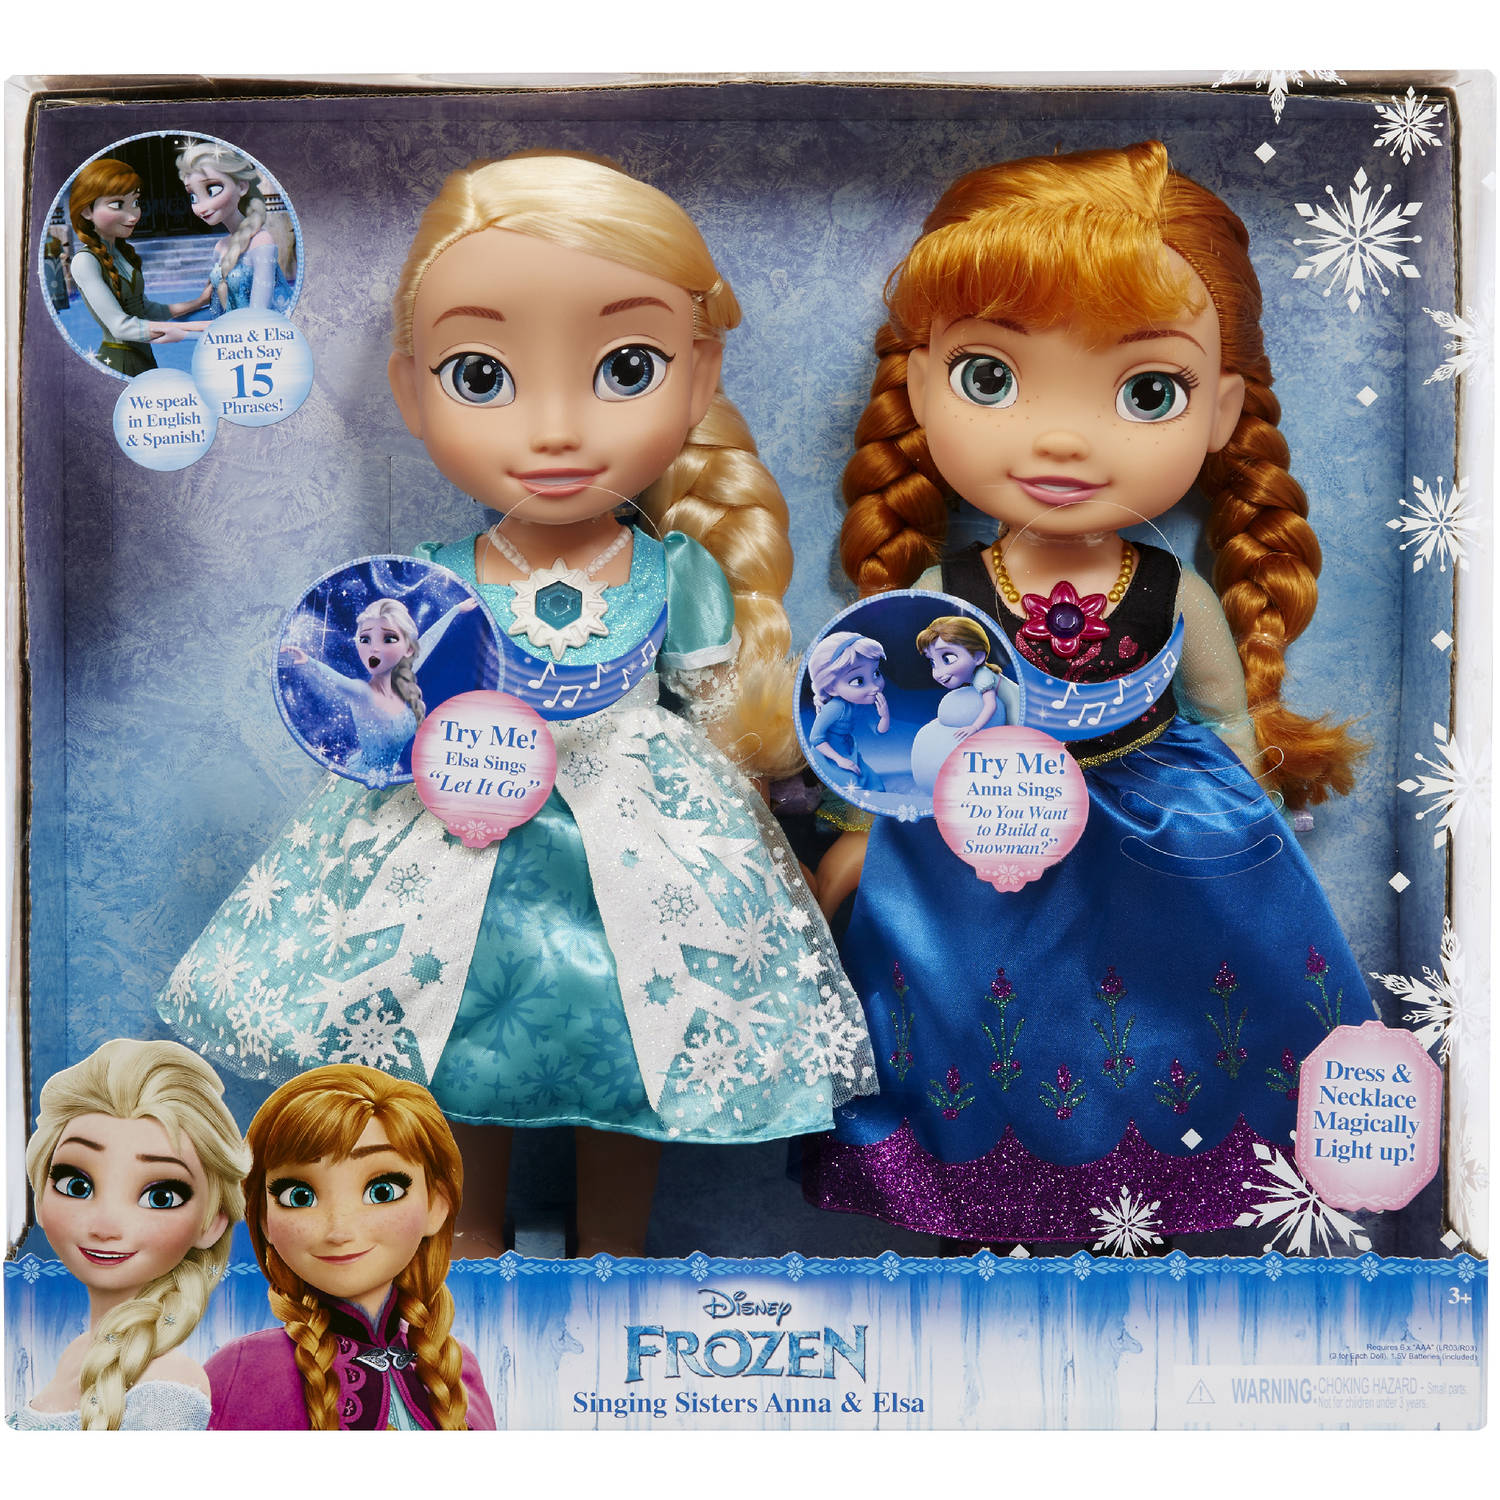 Disney Frozen Singing Sisters Elsa and Anna Dolls (Exclusive) - image 1 of 3